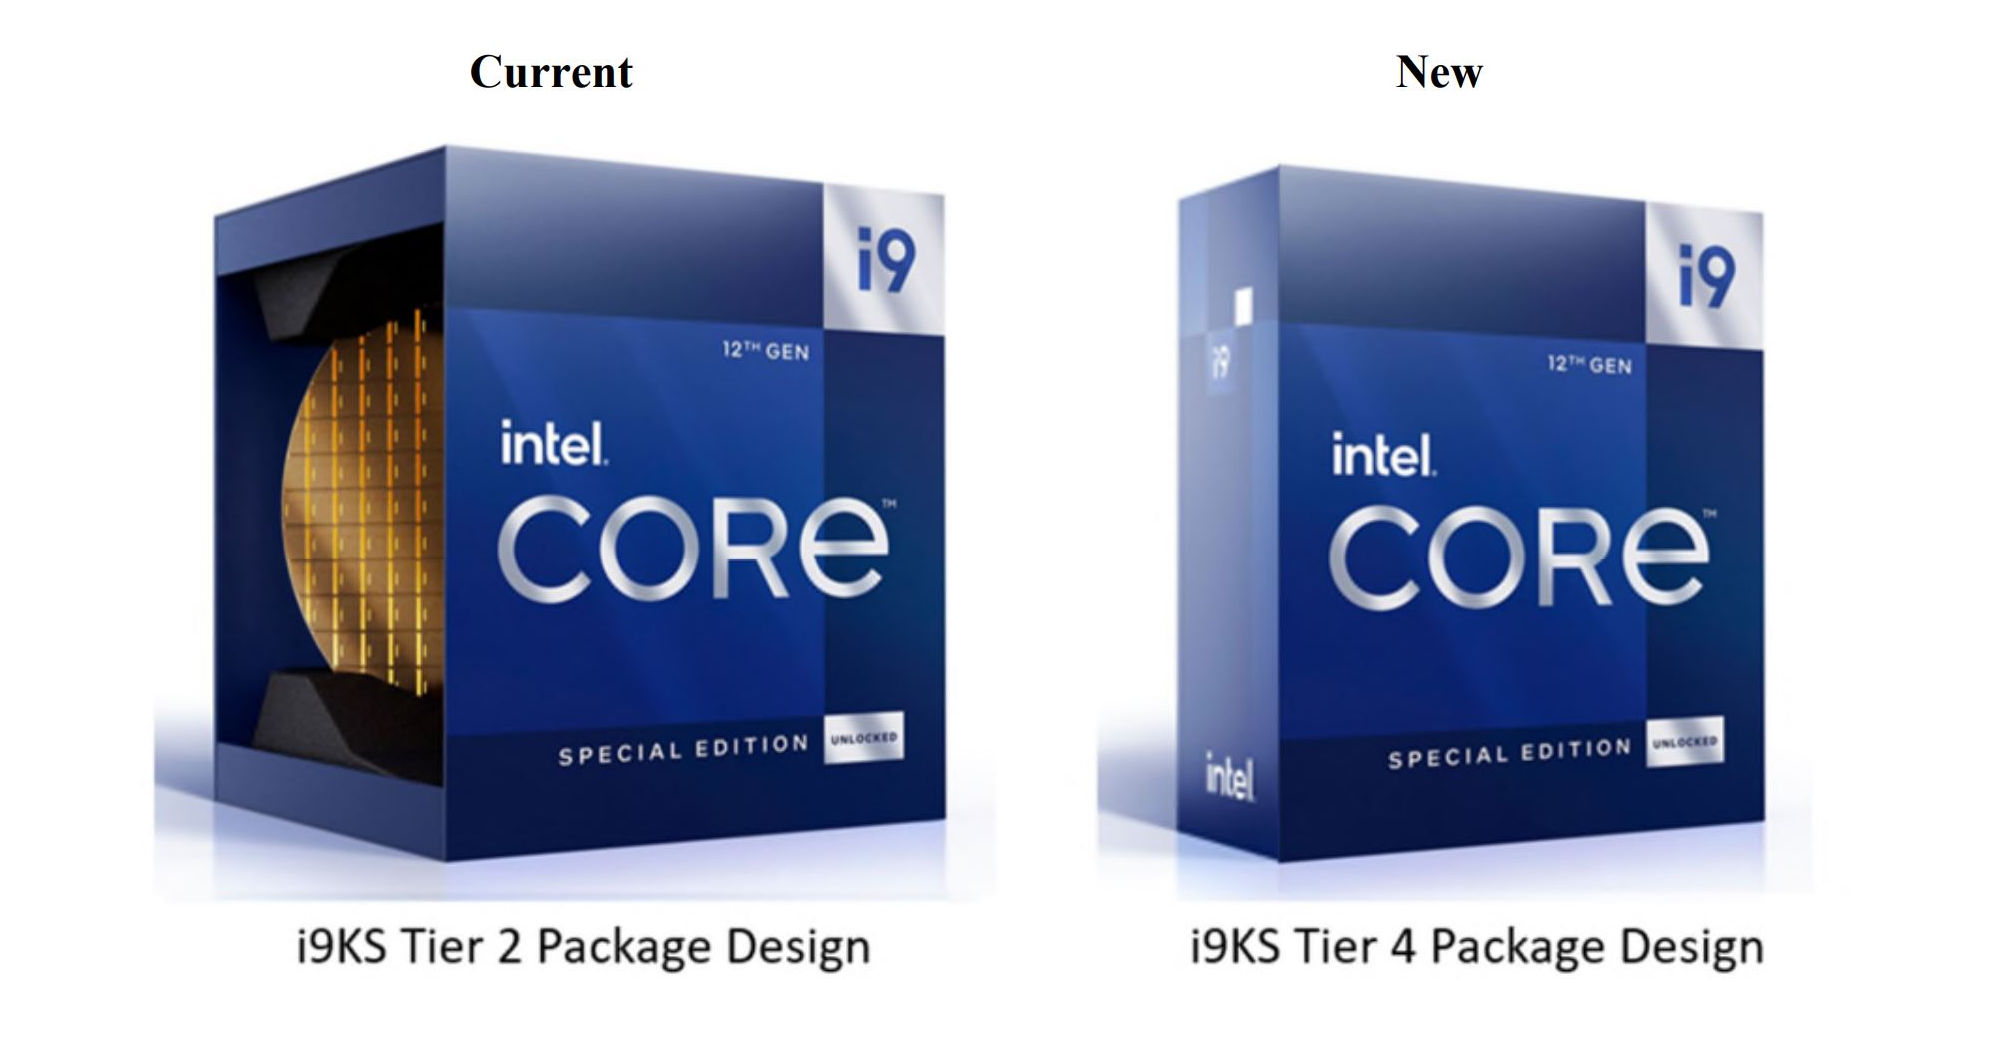 Intel discontinues premium packaging design for Core i9-12900K and i9- 10980XE CPUs 